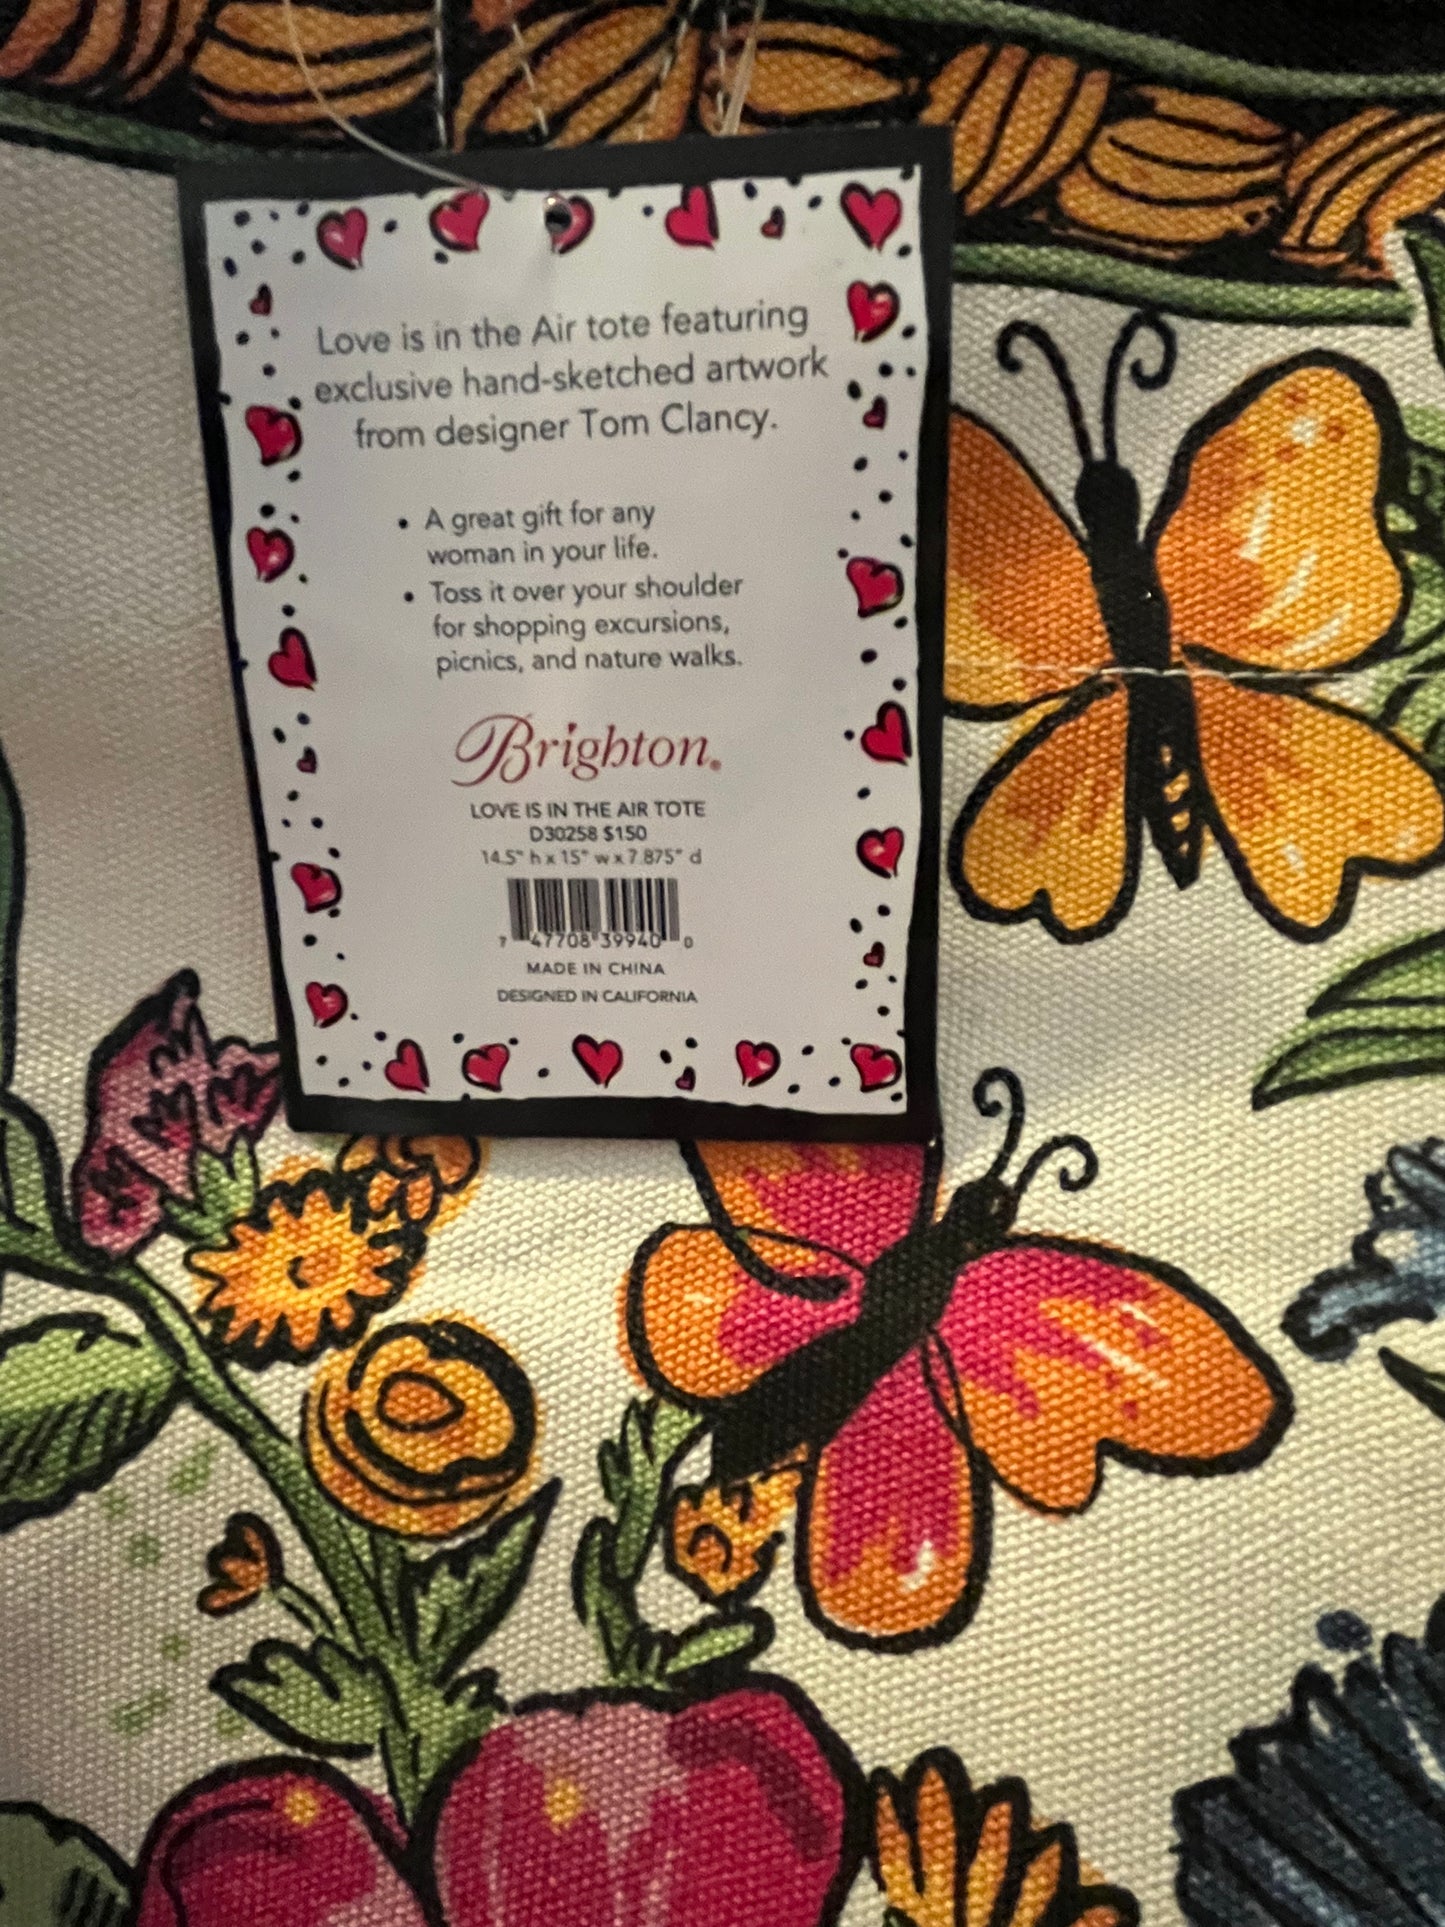 NWT Brighton "Love is in the Air" Canvas Tote